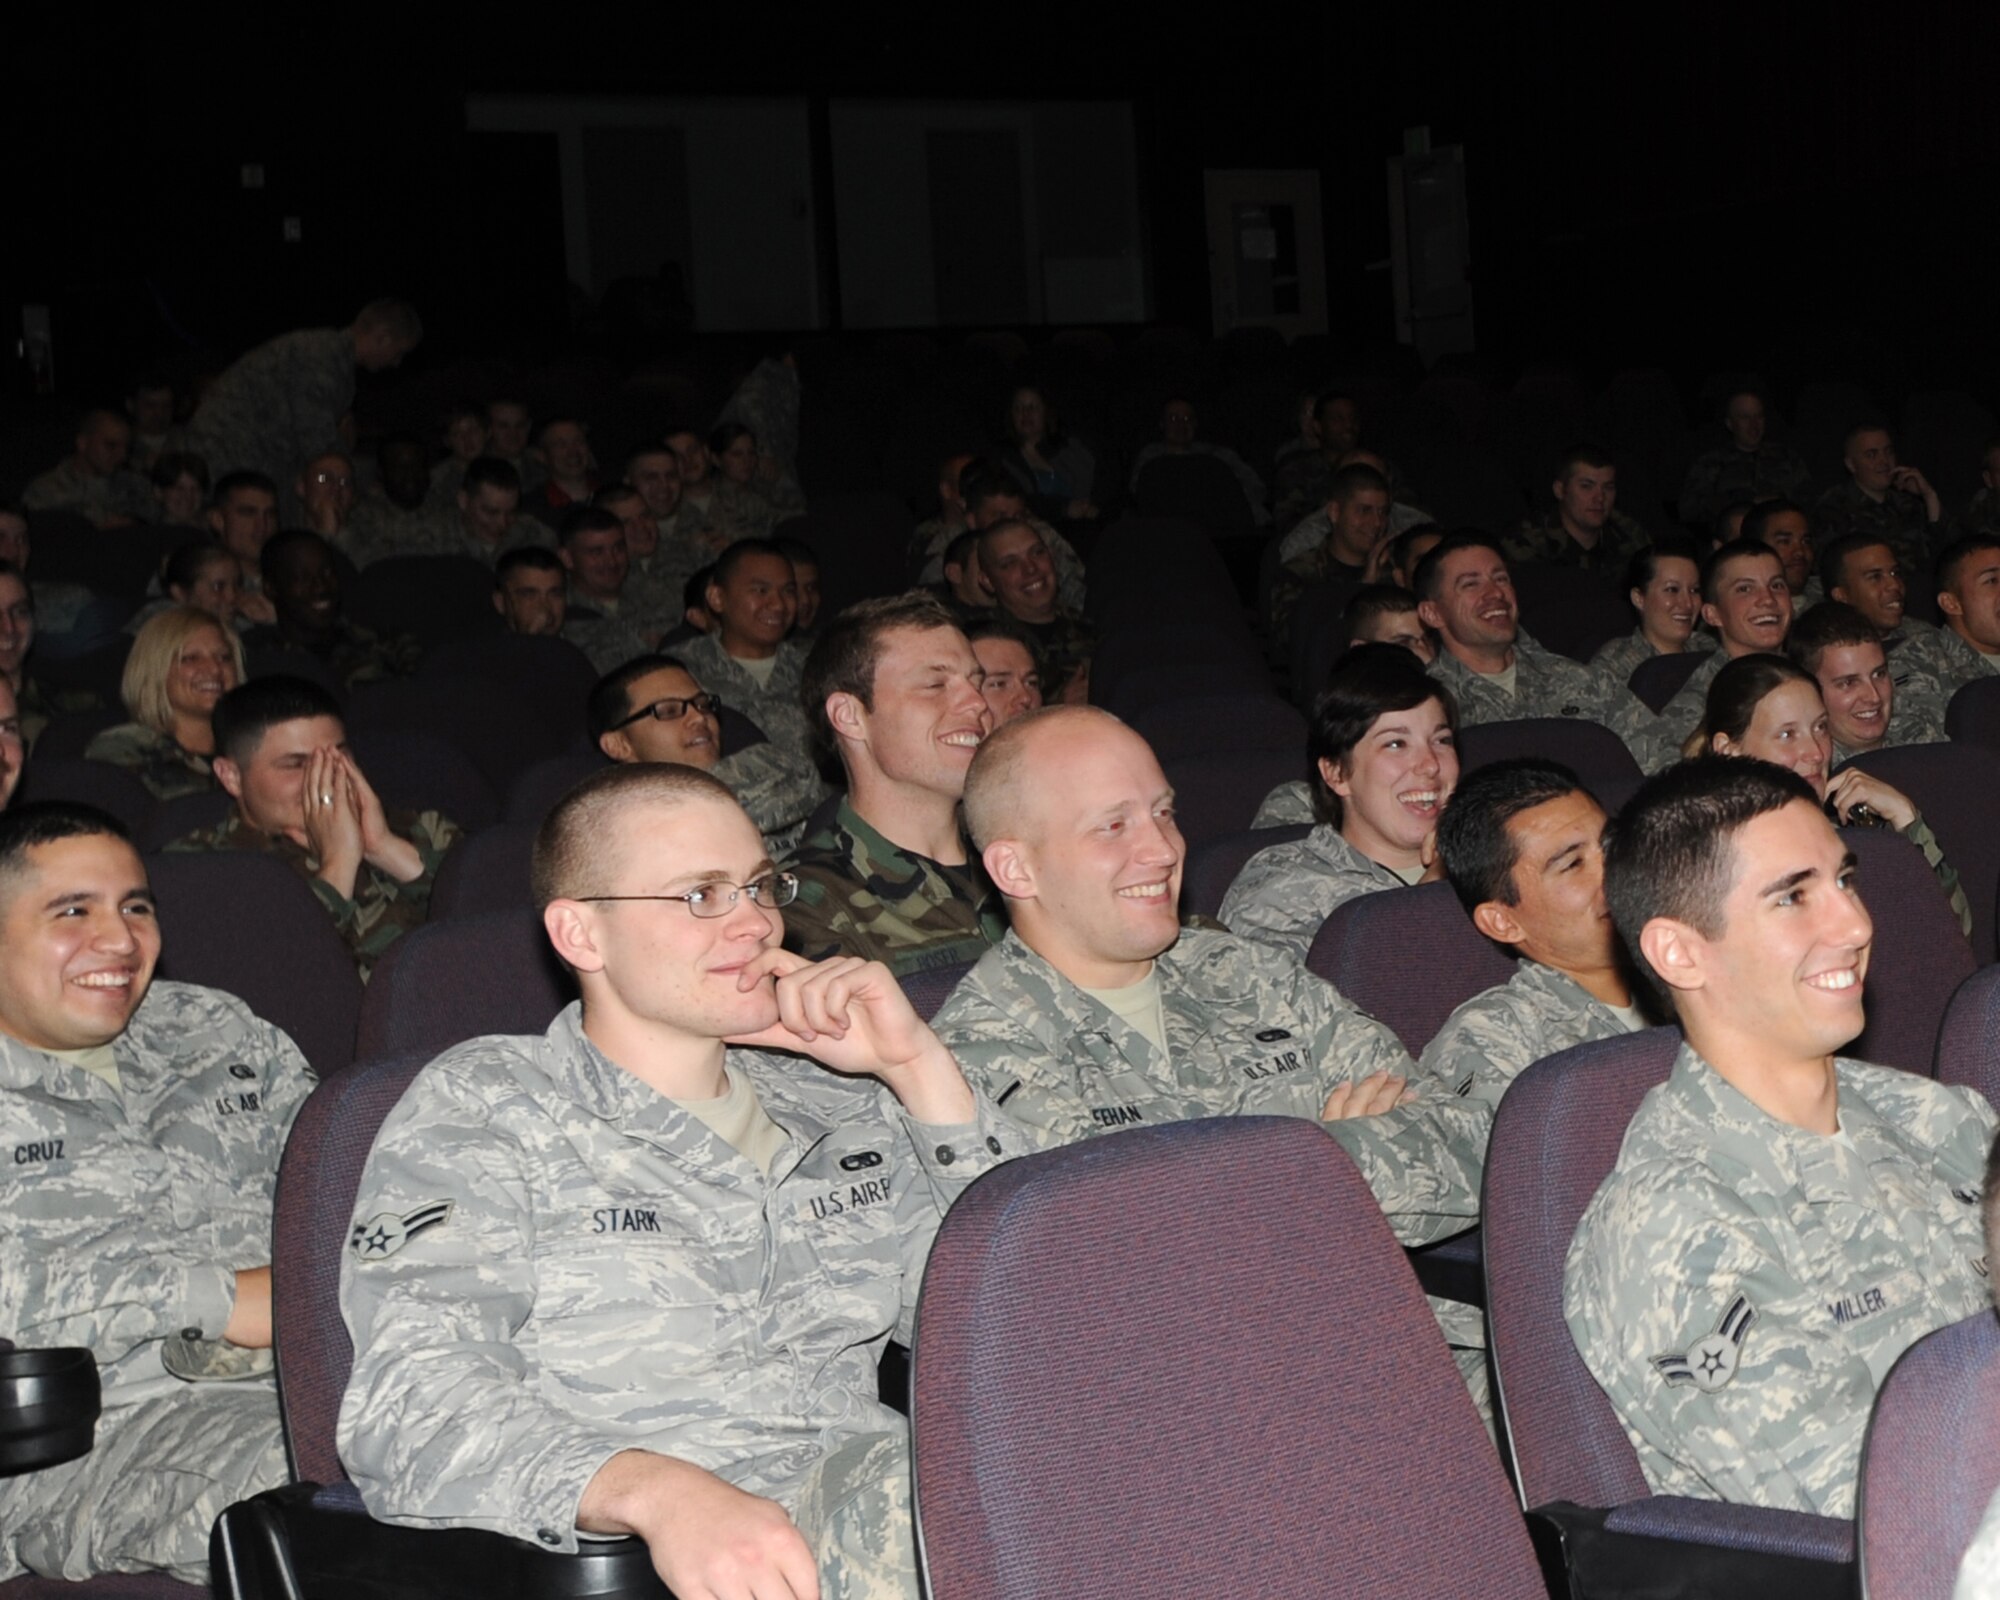 ELMENDORF AIR FORCE BASE, Alaska -- Airmen enjoy a morning break during a comedic performance by Bernie McGrenahan June 16. McGrenahan's show puts a comedic twist on Alchohol and Drug abuse prevention from his own personal life experiences. (U.S. Air Force photo/Airman 1st Class Kristin High)